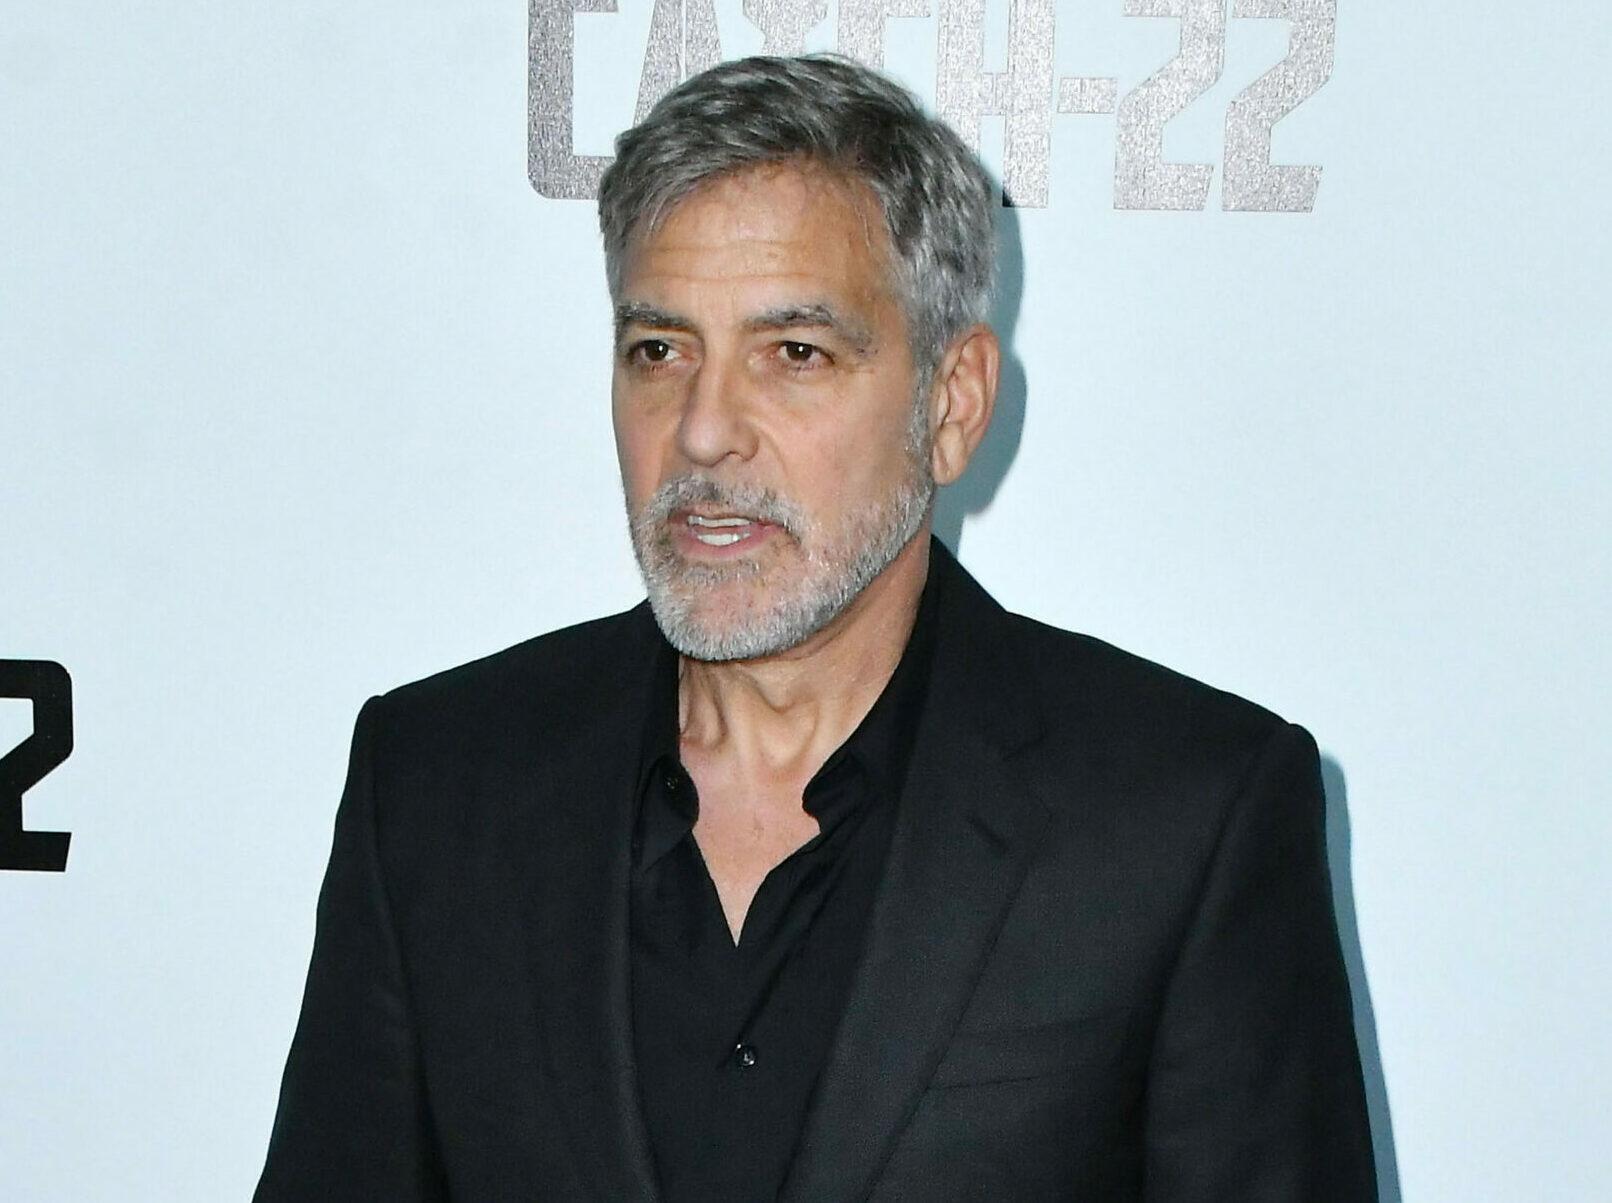 UK premiere of George Clooney's Channel 4 series 